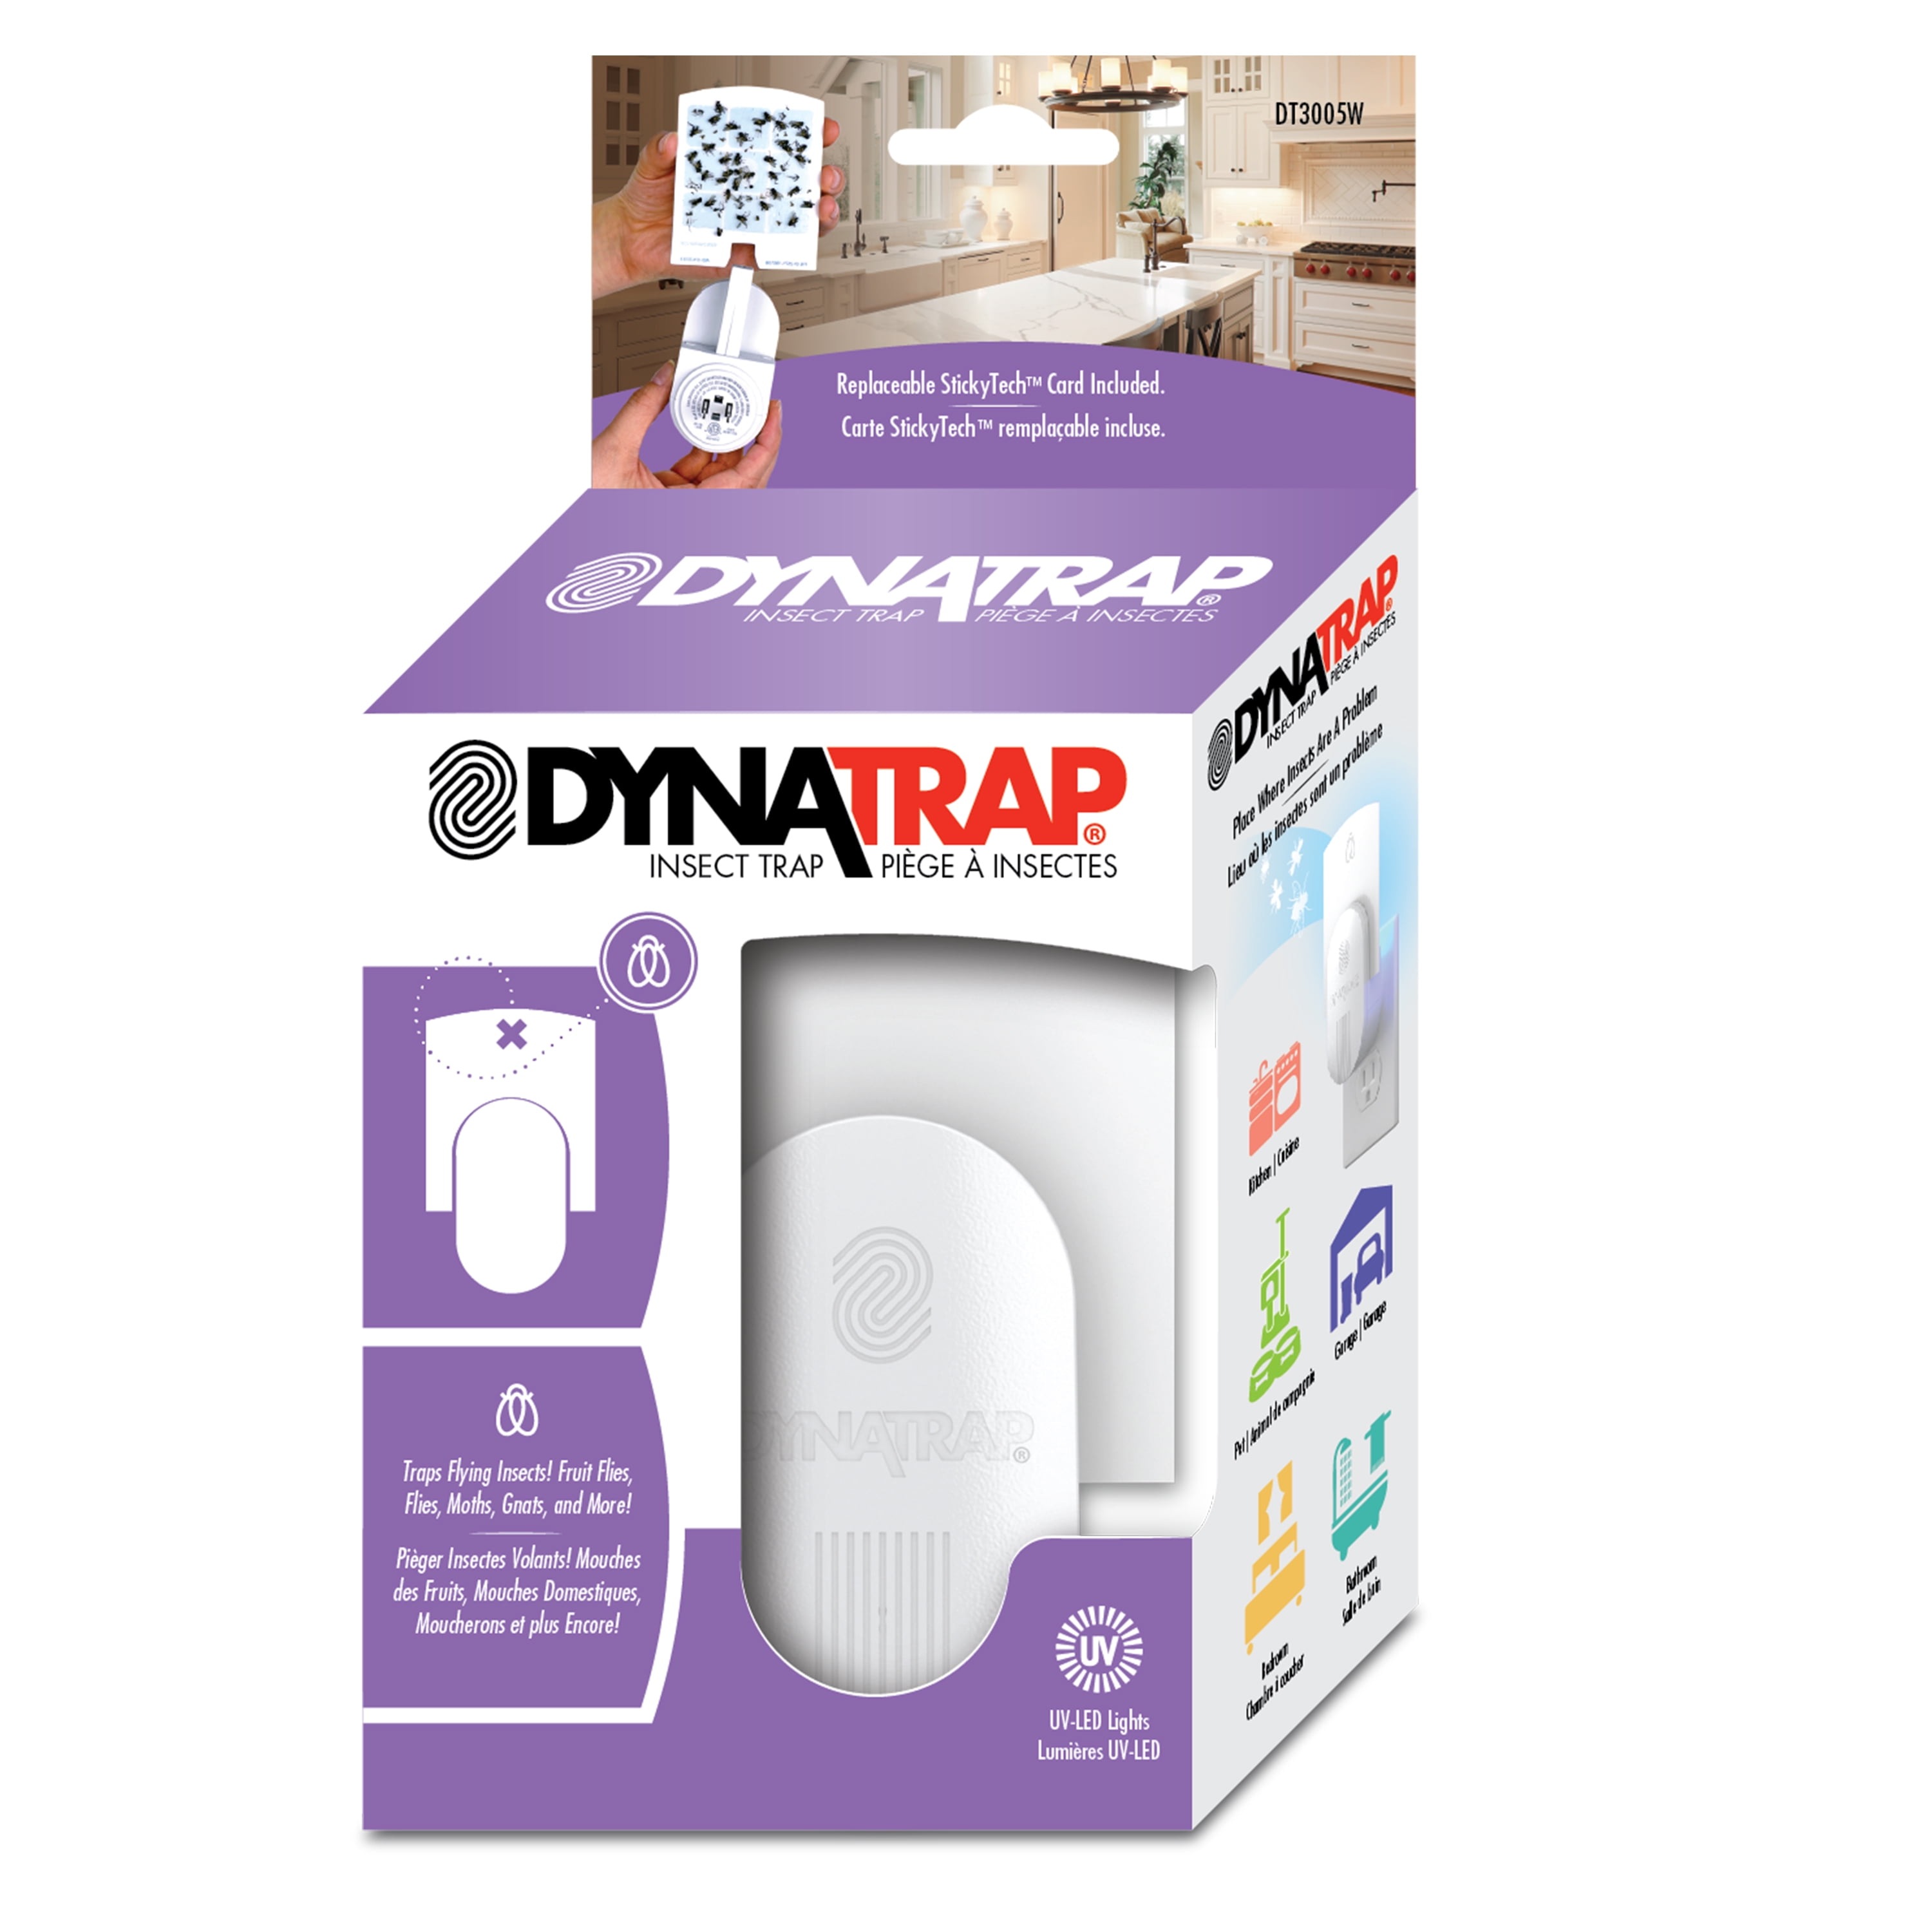 DynaTrap Flylight Insect Trap with 2 AC Outlets - White - 9952450